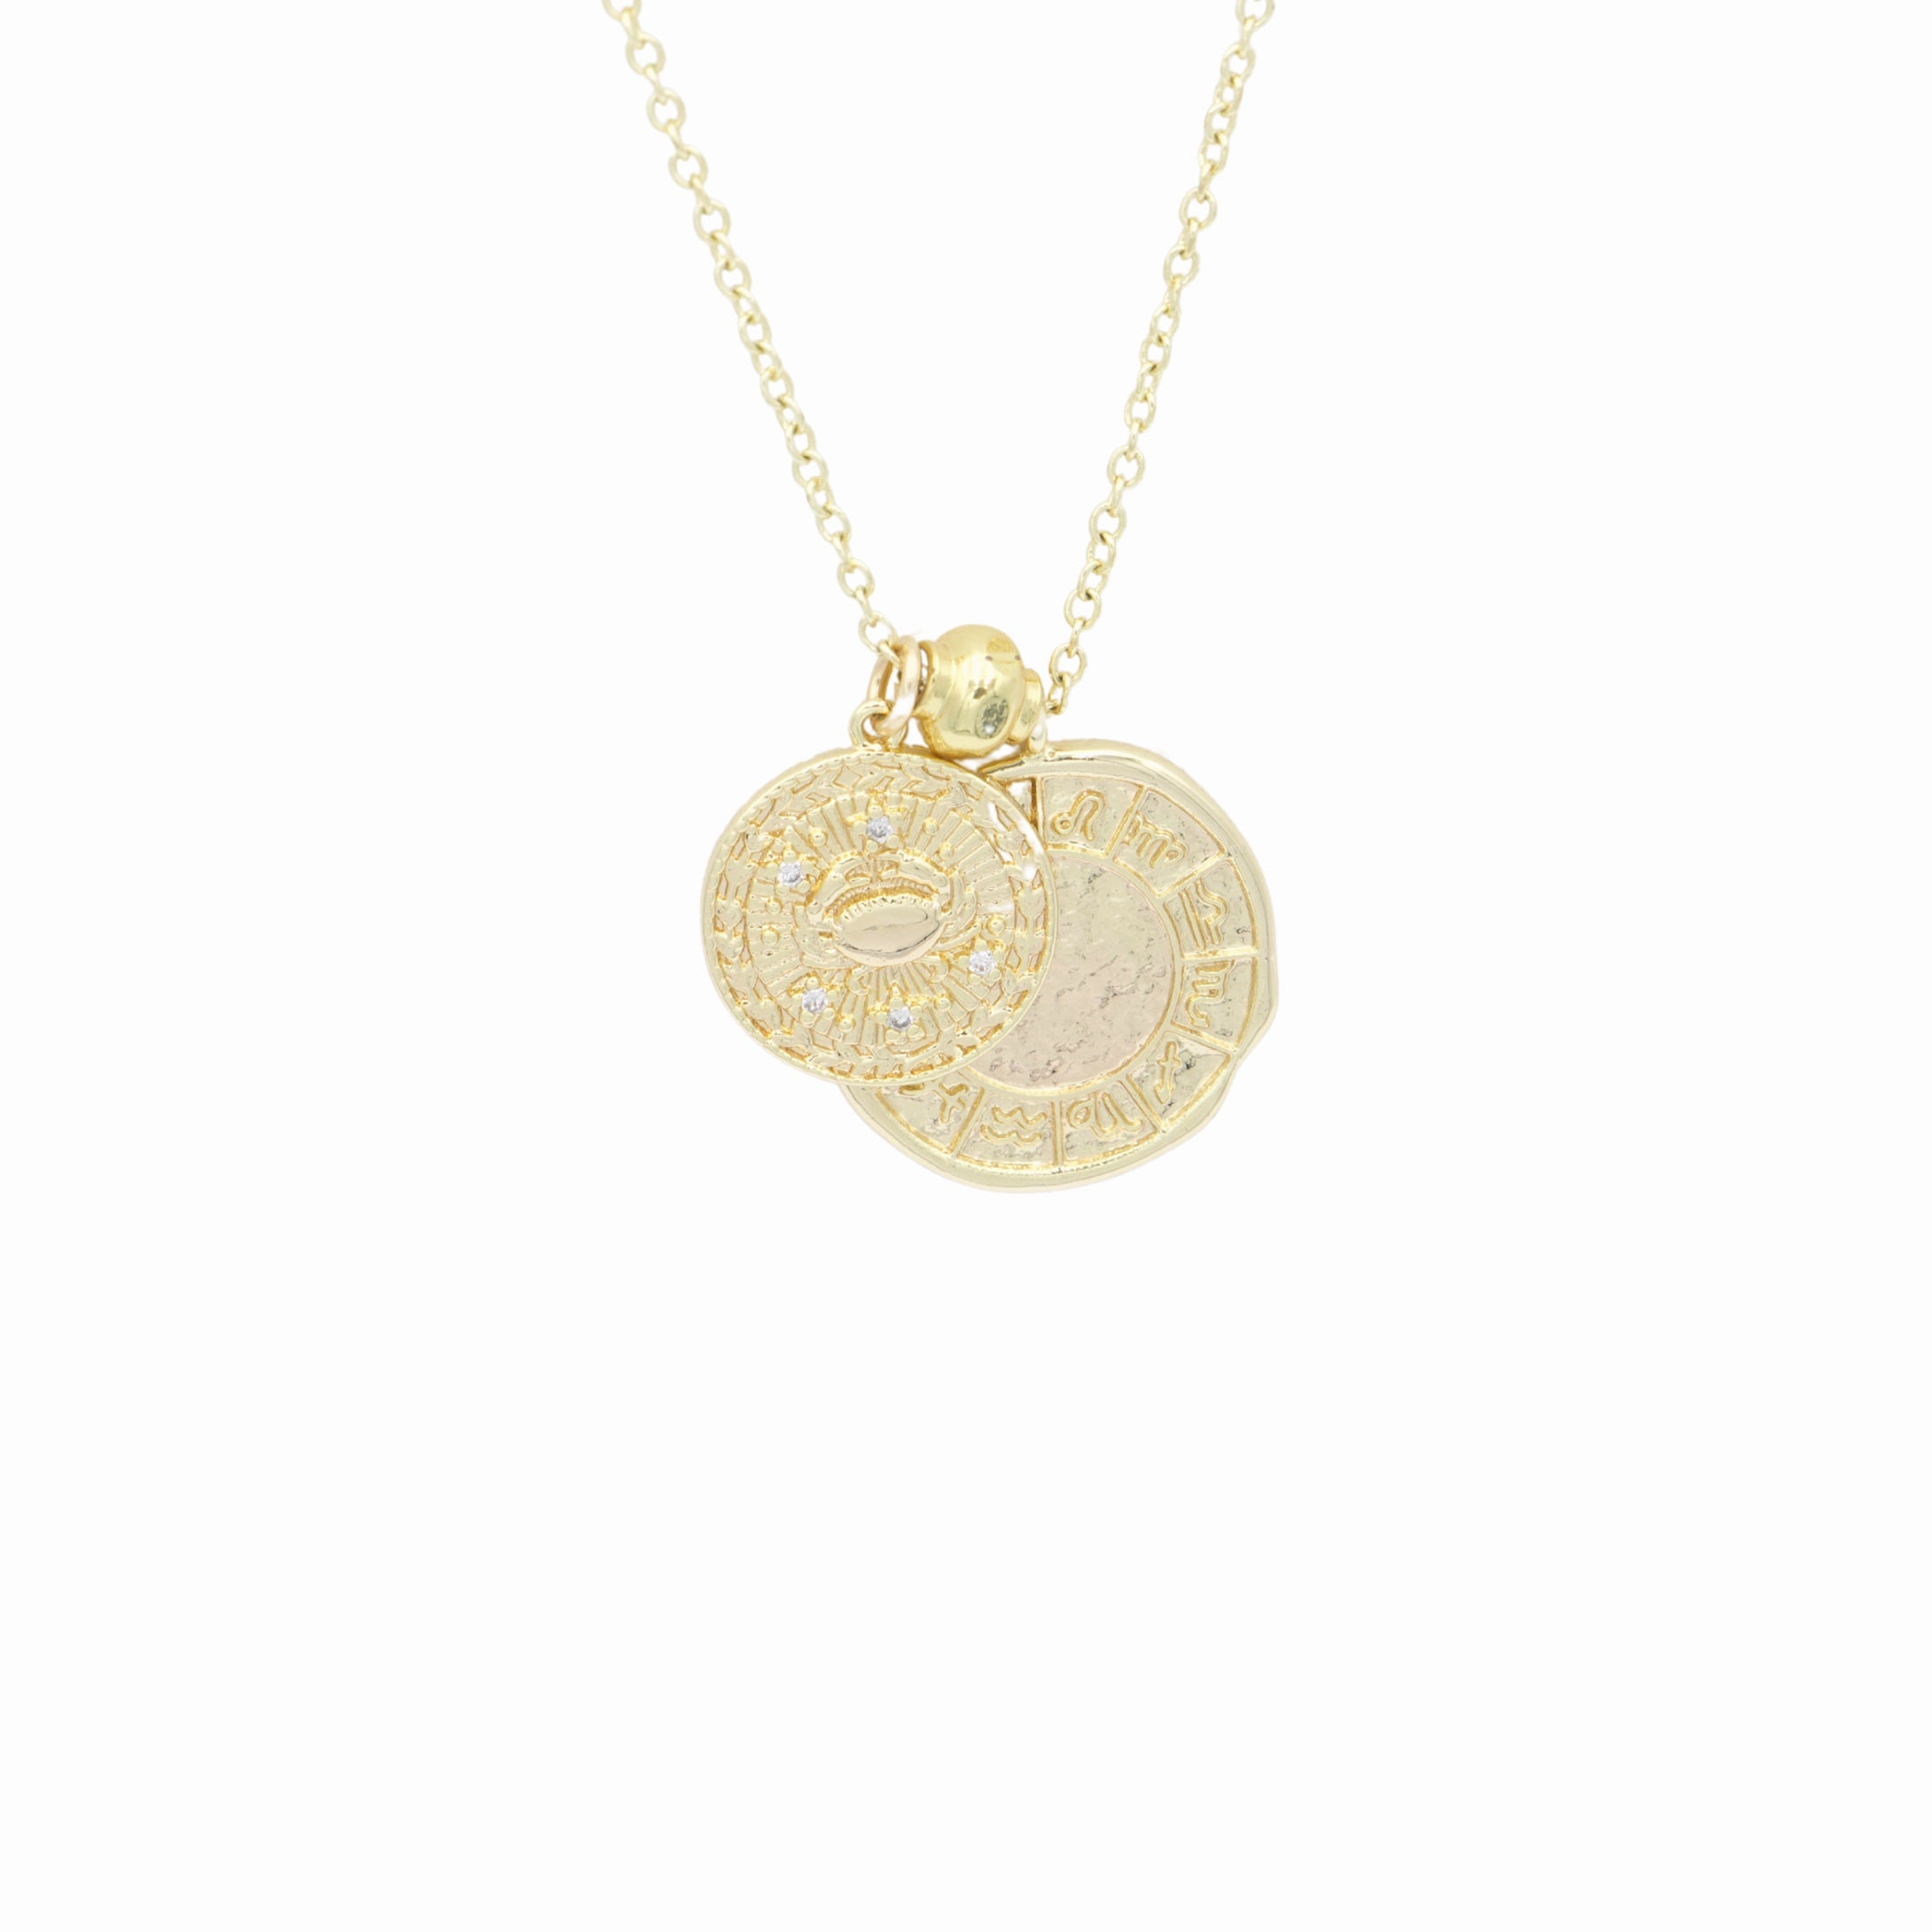 AW Boutique's dual zodiac coin necklace featuring a dainty necklace chain, zodiac rustic coin charm, and your chosen star sign coin charm. Charms separated by a gold bead. Part of the Celestial Collection. Gold filled jewellery. Option shown is Cancer.